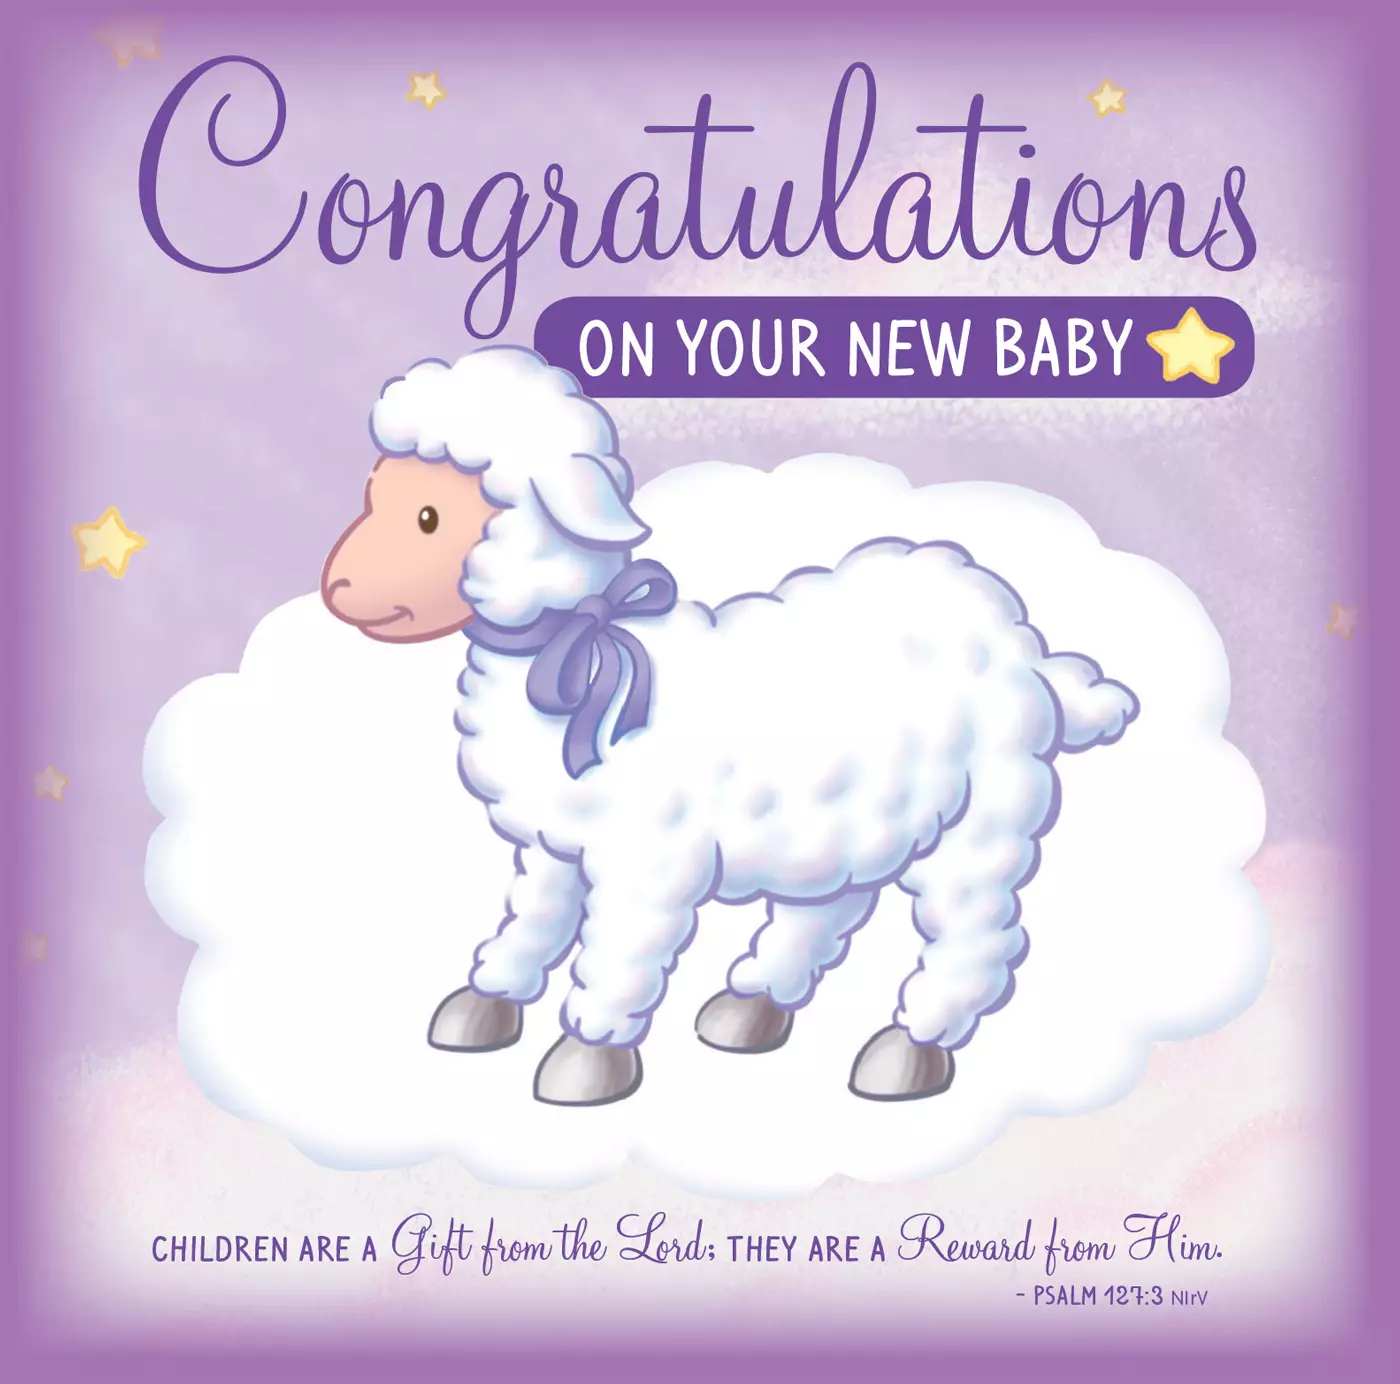 Congratulations on Your New Baby Greeting Card/CD: Sweet Instrumental Lullabies and Bible Songs